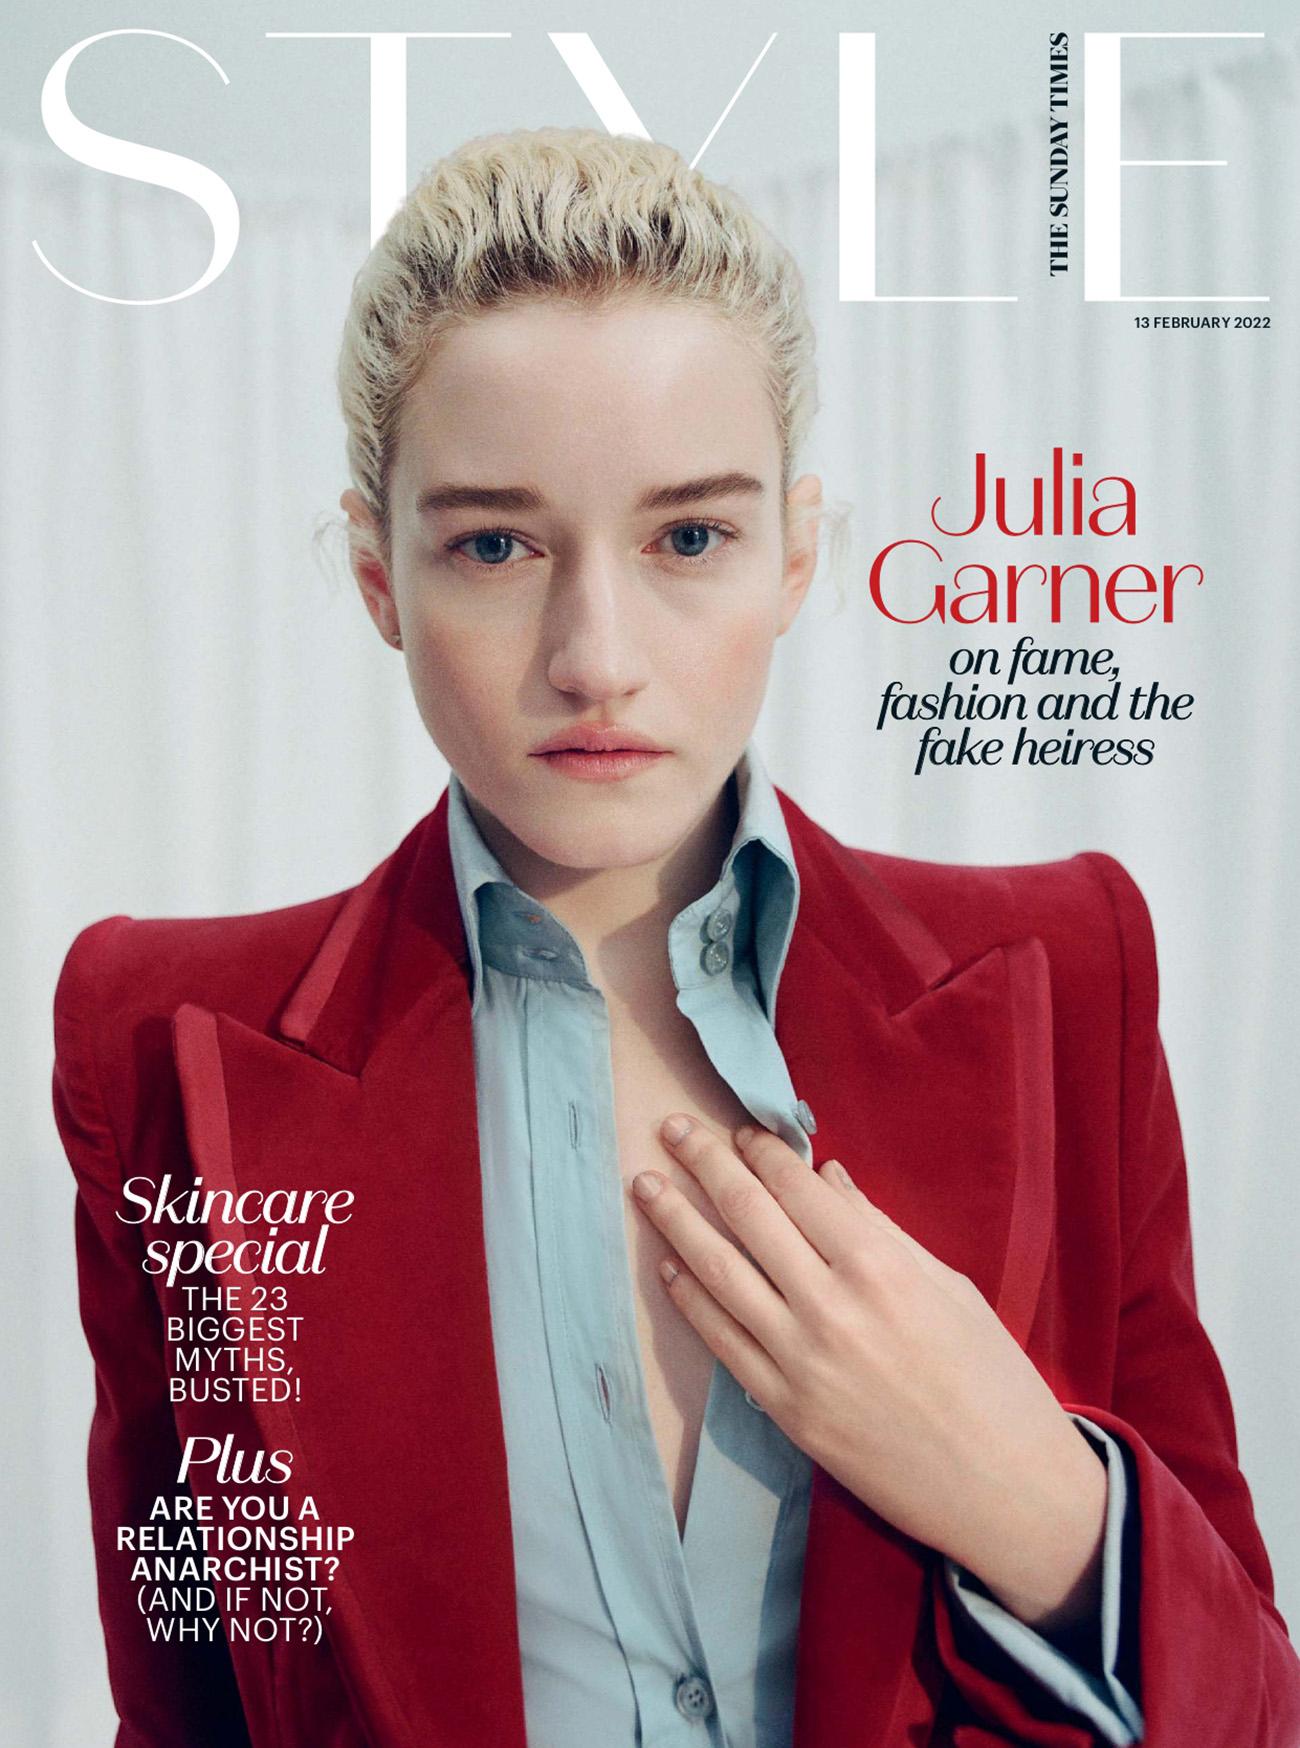 Julia Garner covers The Sunday Times Style February 13th, 2022 by Olivia Malone